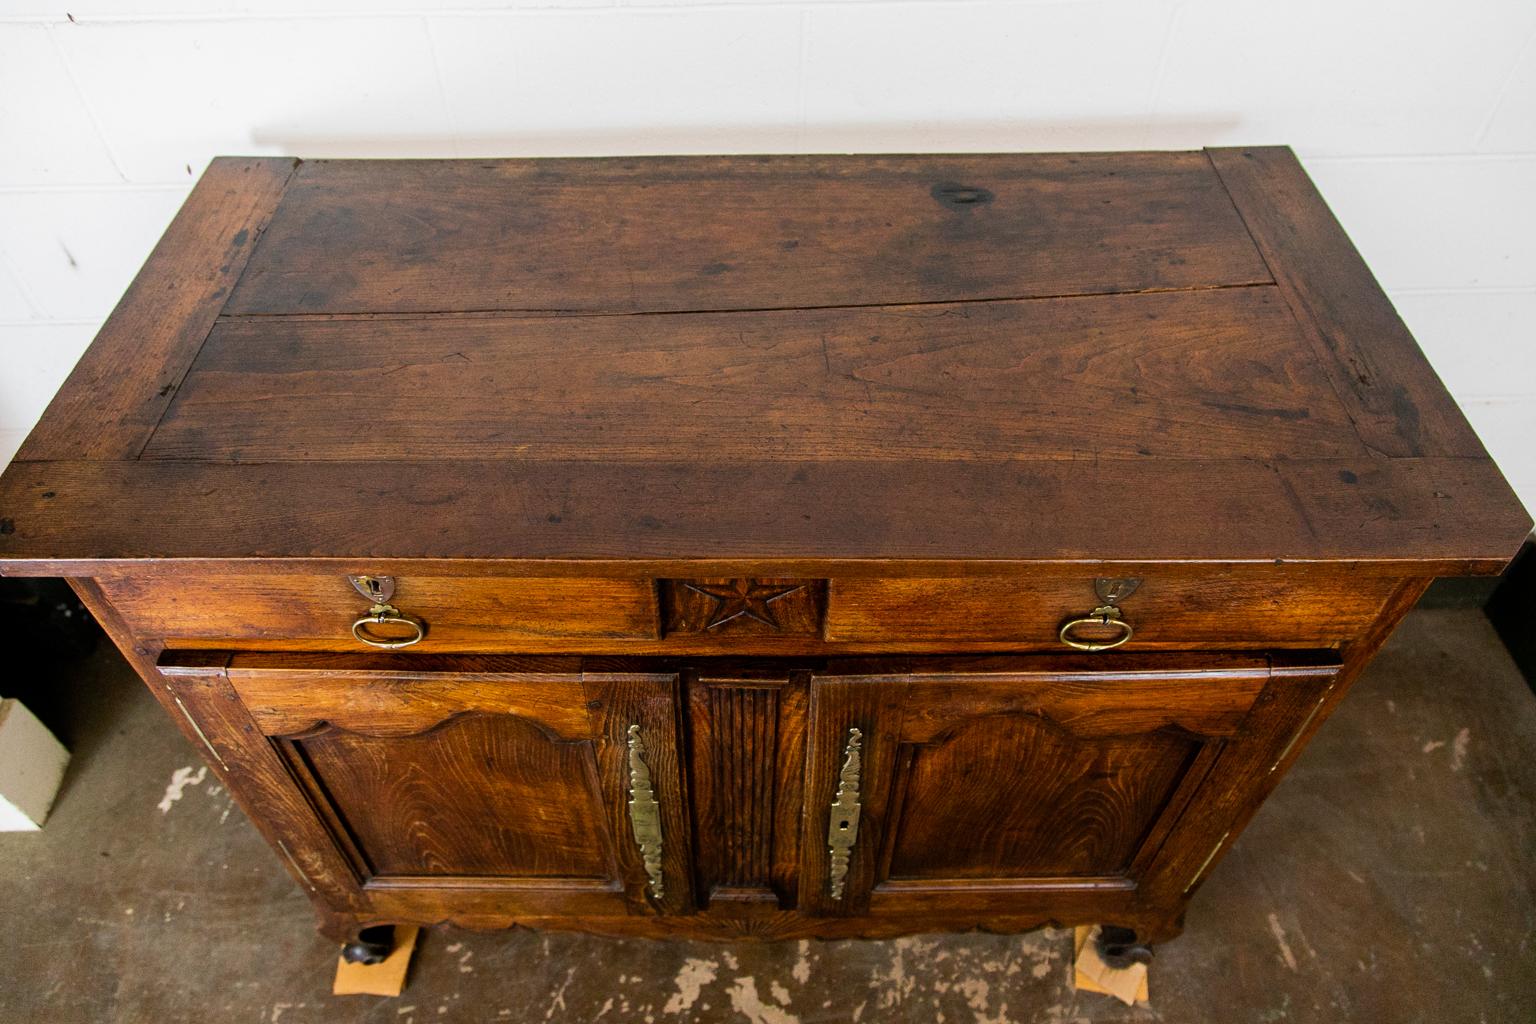 The top of this buffet has a 1/8 inch separation on the top. There are four inch wide breadboard ends. There is an encised carved star between the two drawers. A fluted pilaster divides the two doors but is actually attached to the left end door.